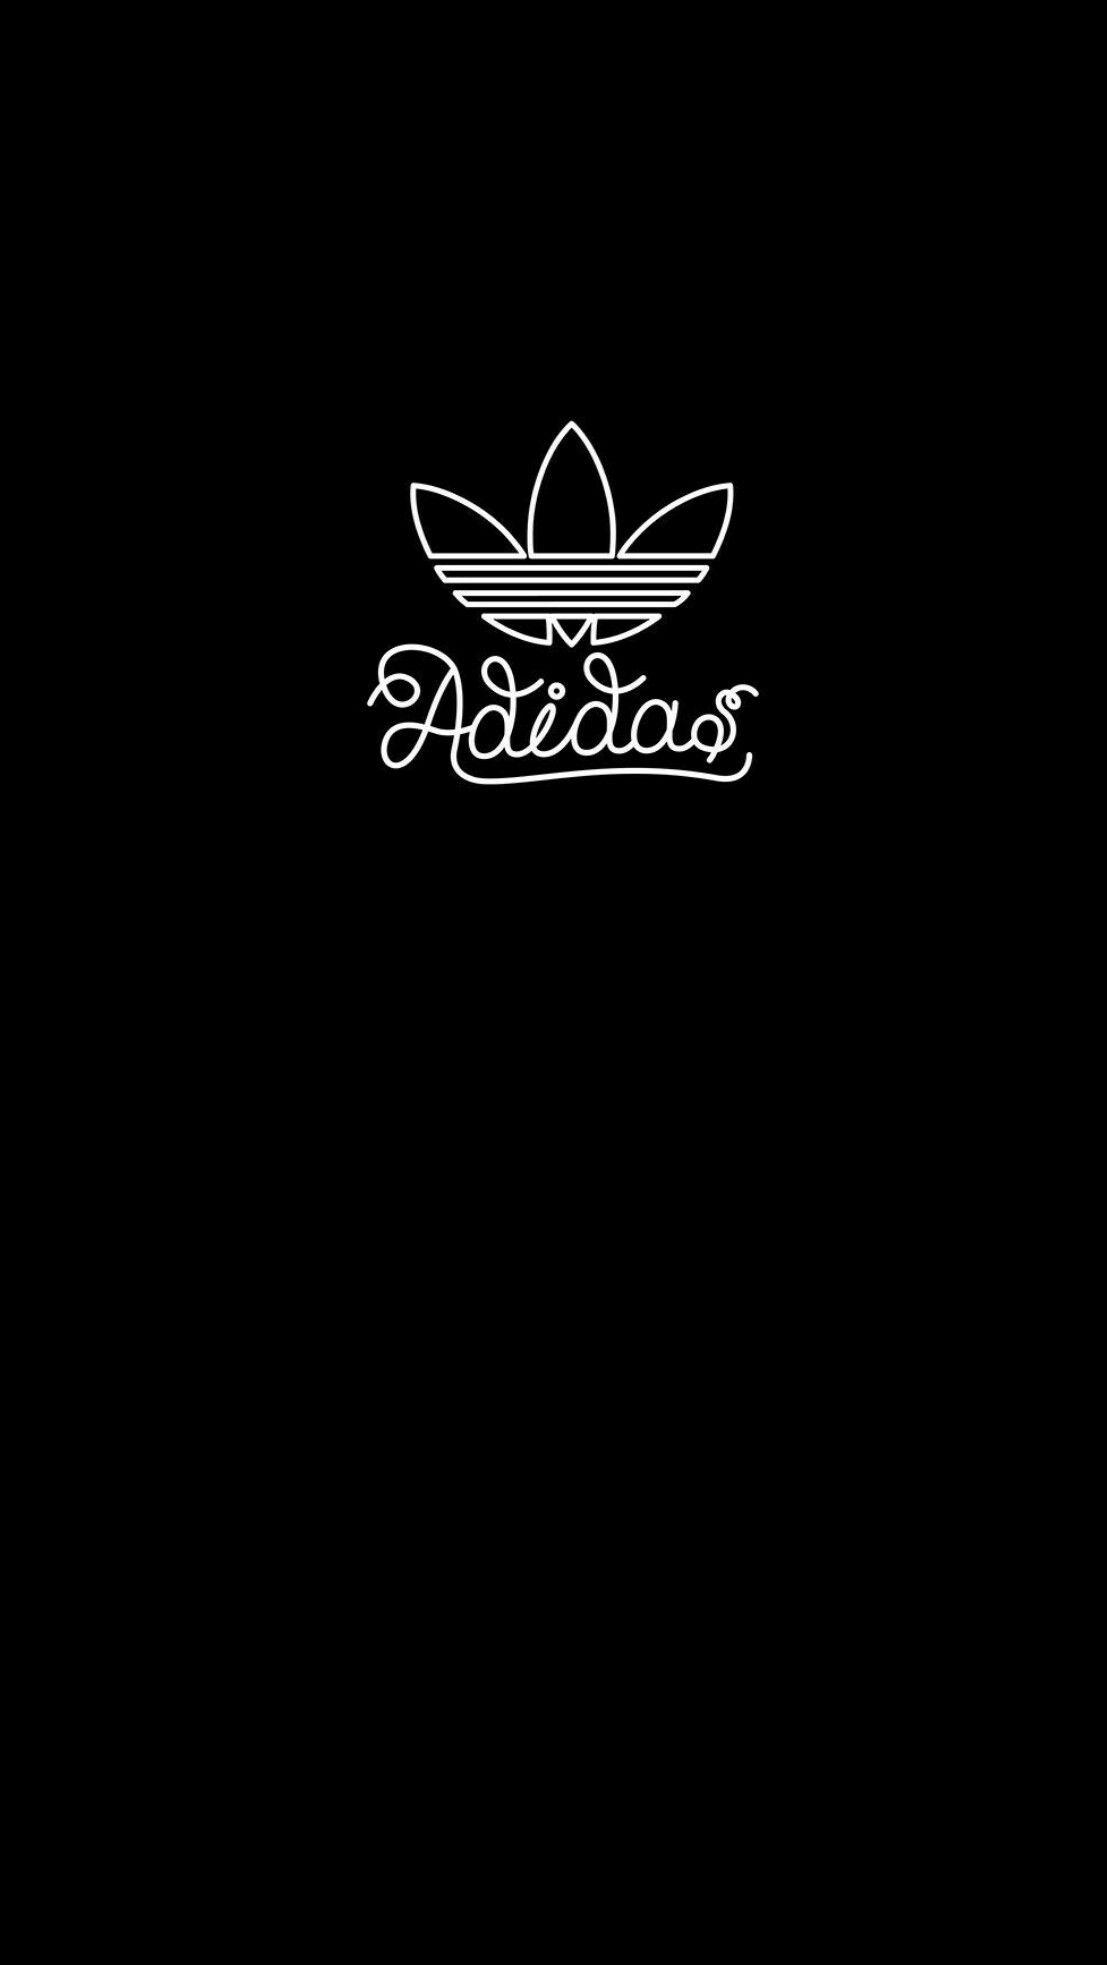 Grizzly Skate iPhone Wallpaper